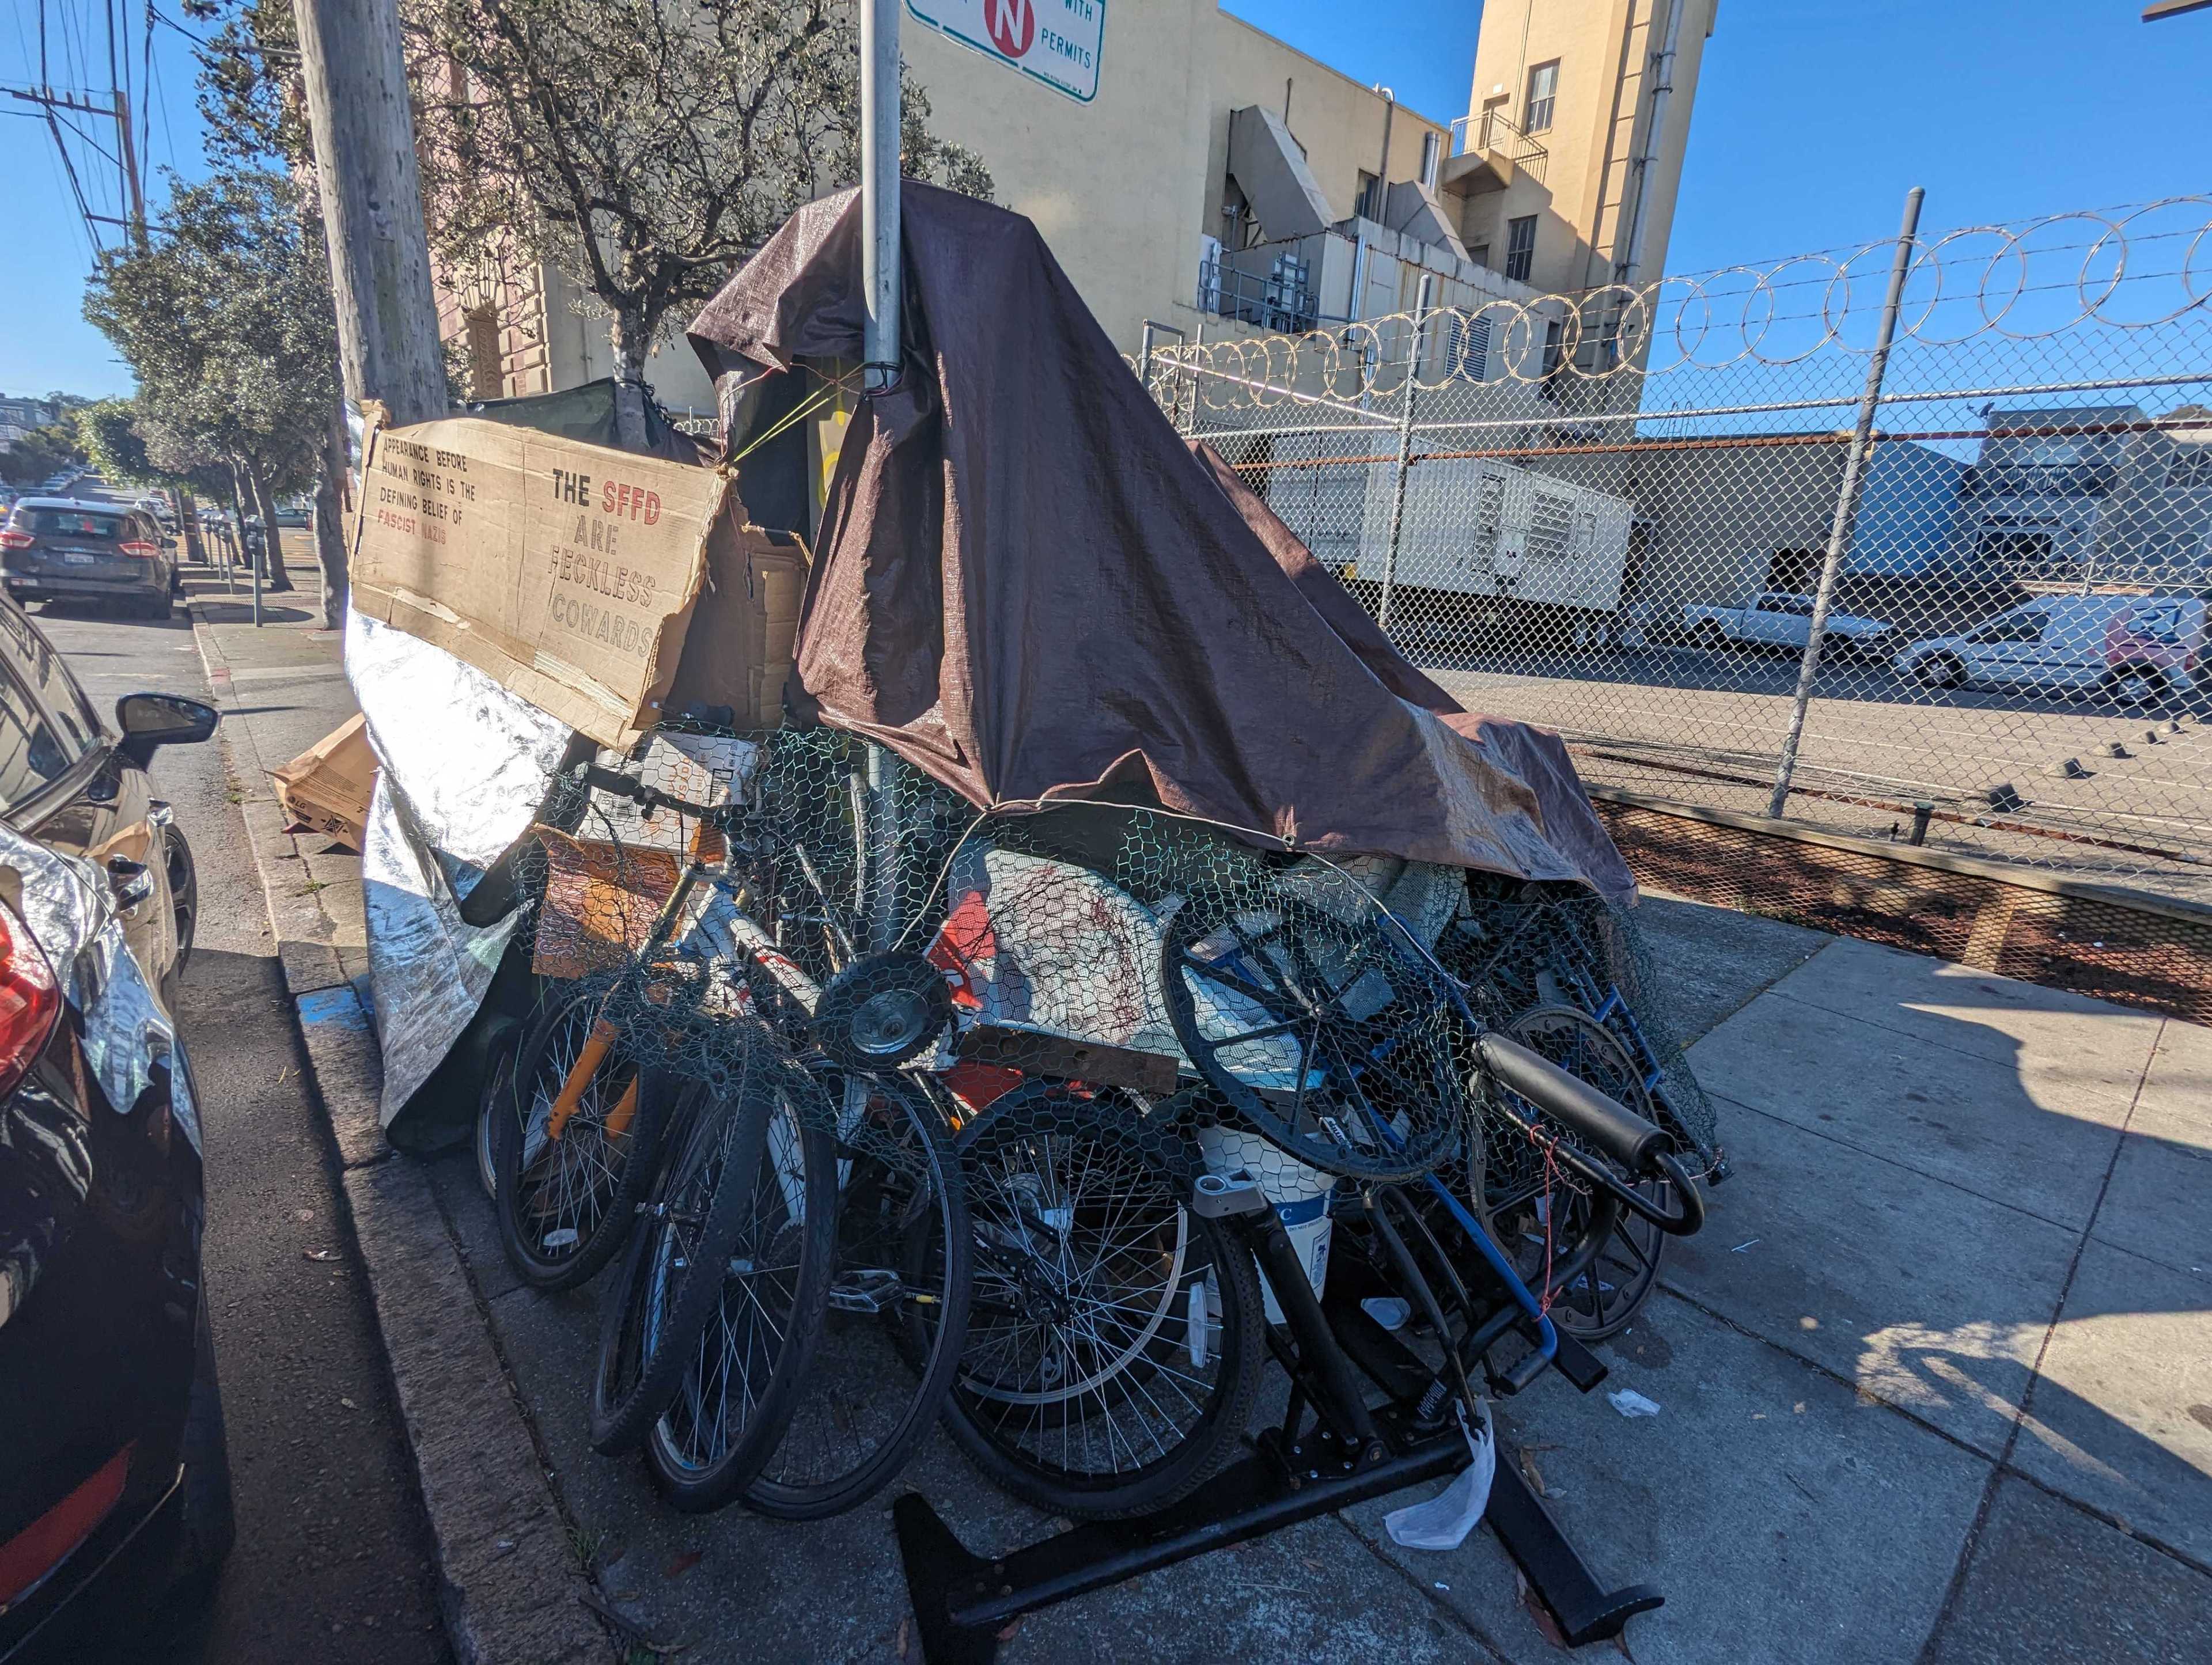 Signs reading &quot;Appearance before human rights is the defining belief of fascist Nazis&quot; and &quot;the SFPD are feckless cowards&quot; sit atop Joseph Adam Moore's encampment on Ninth Avenue north of Geary Boulevard in San Francisco's Inner Richmond neighborhood.